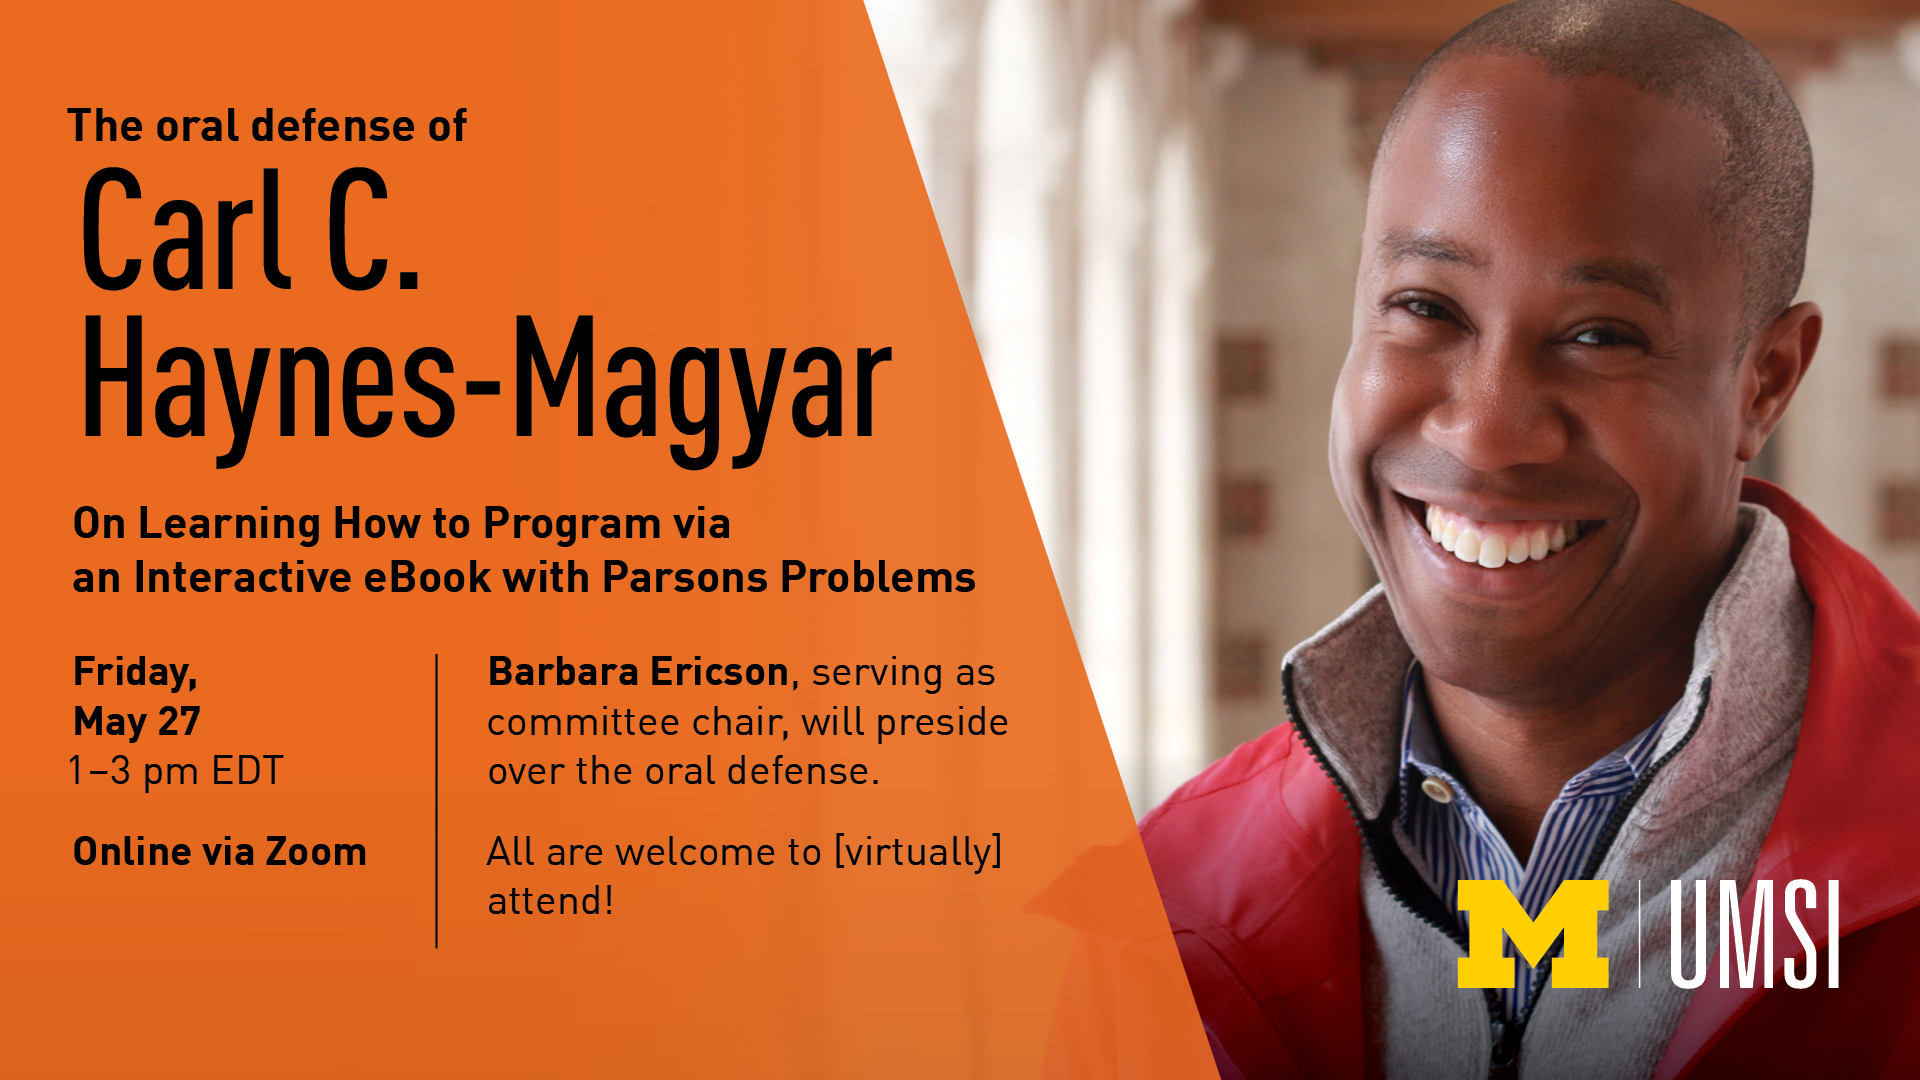 “The oral defense of Carl C. Haynes-Magyar. On Learning How to Program via an Interactive eBook with Parsons Problems. Friday, Mary 27. 1-3 p.m. EDT. Online via Zoom. Barbara Ericson, serving as committee chair, will preside over the oral defense. All are welcome to [virtually] attend!” 